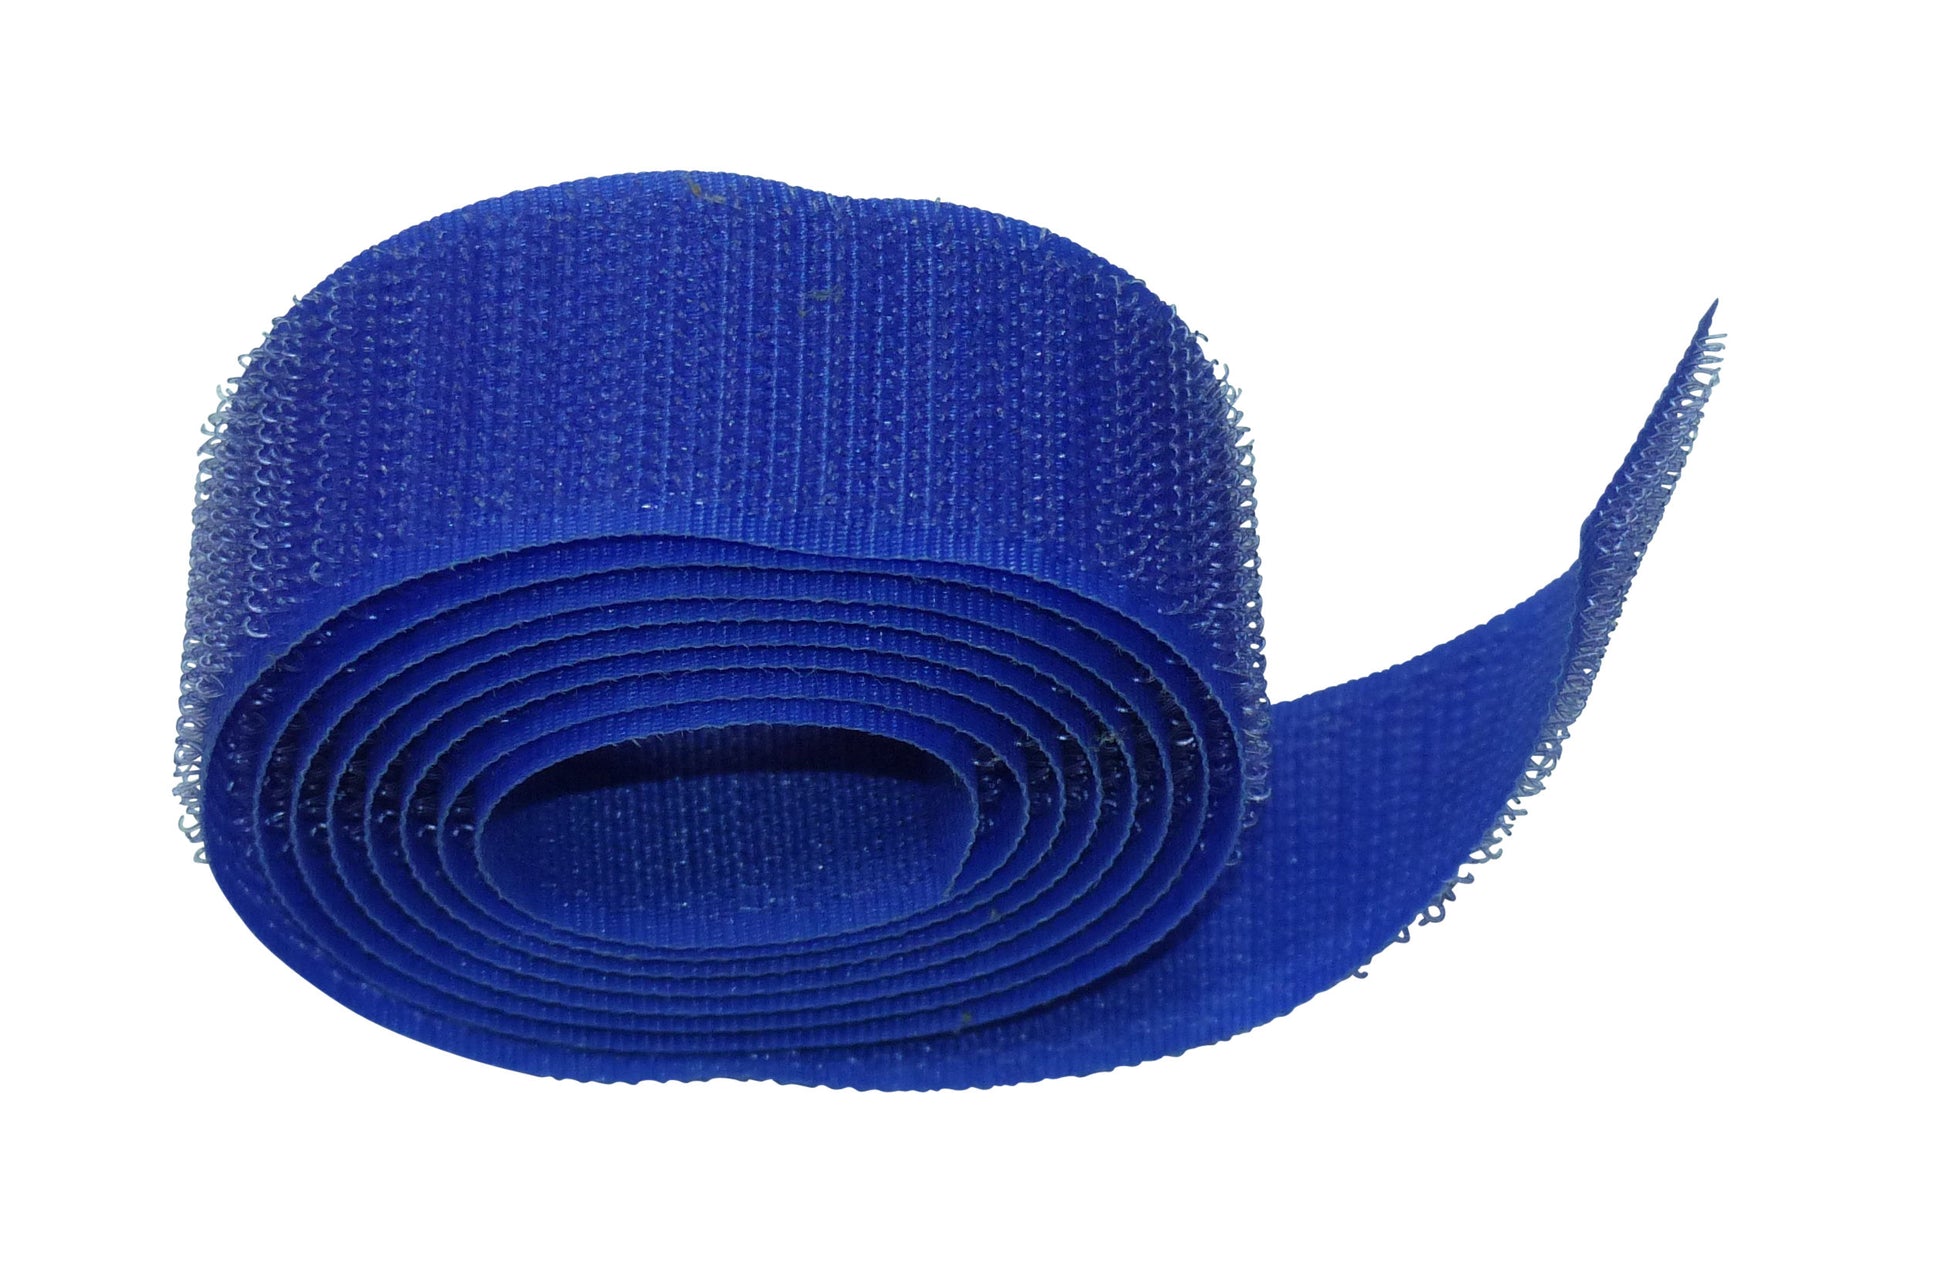 Benristraps 25mm sewable hook and loop tape (2 metres) hook only in blue